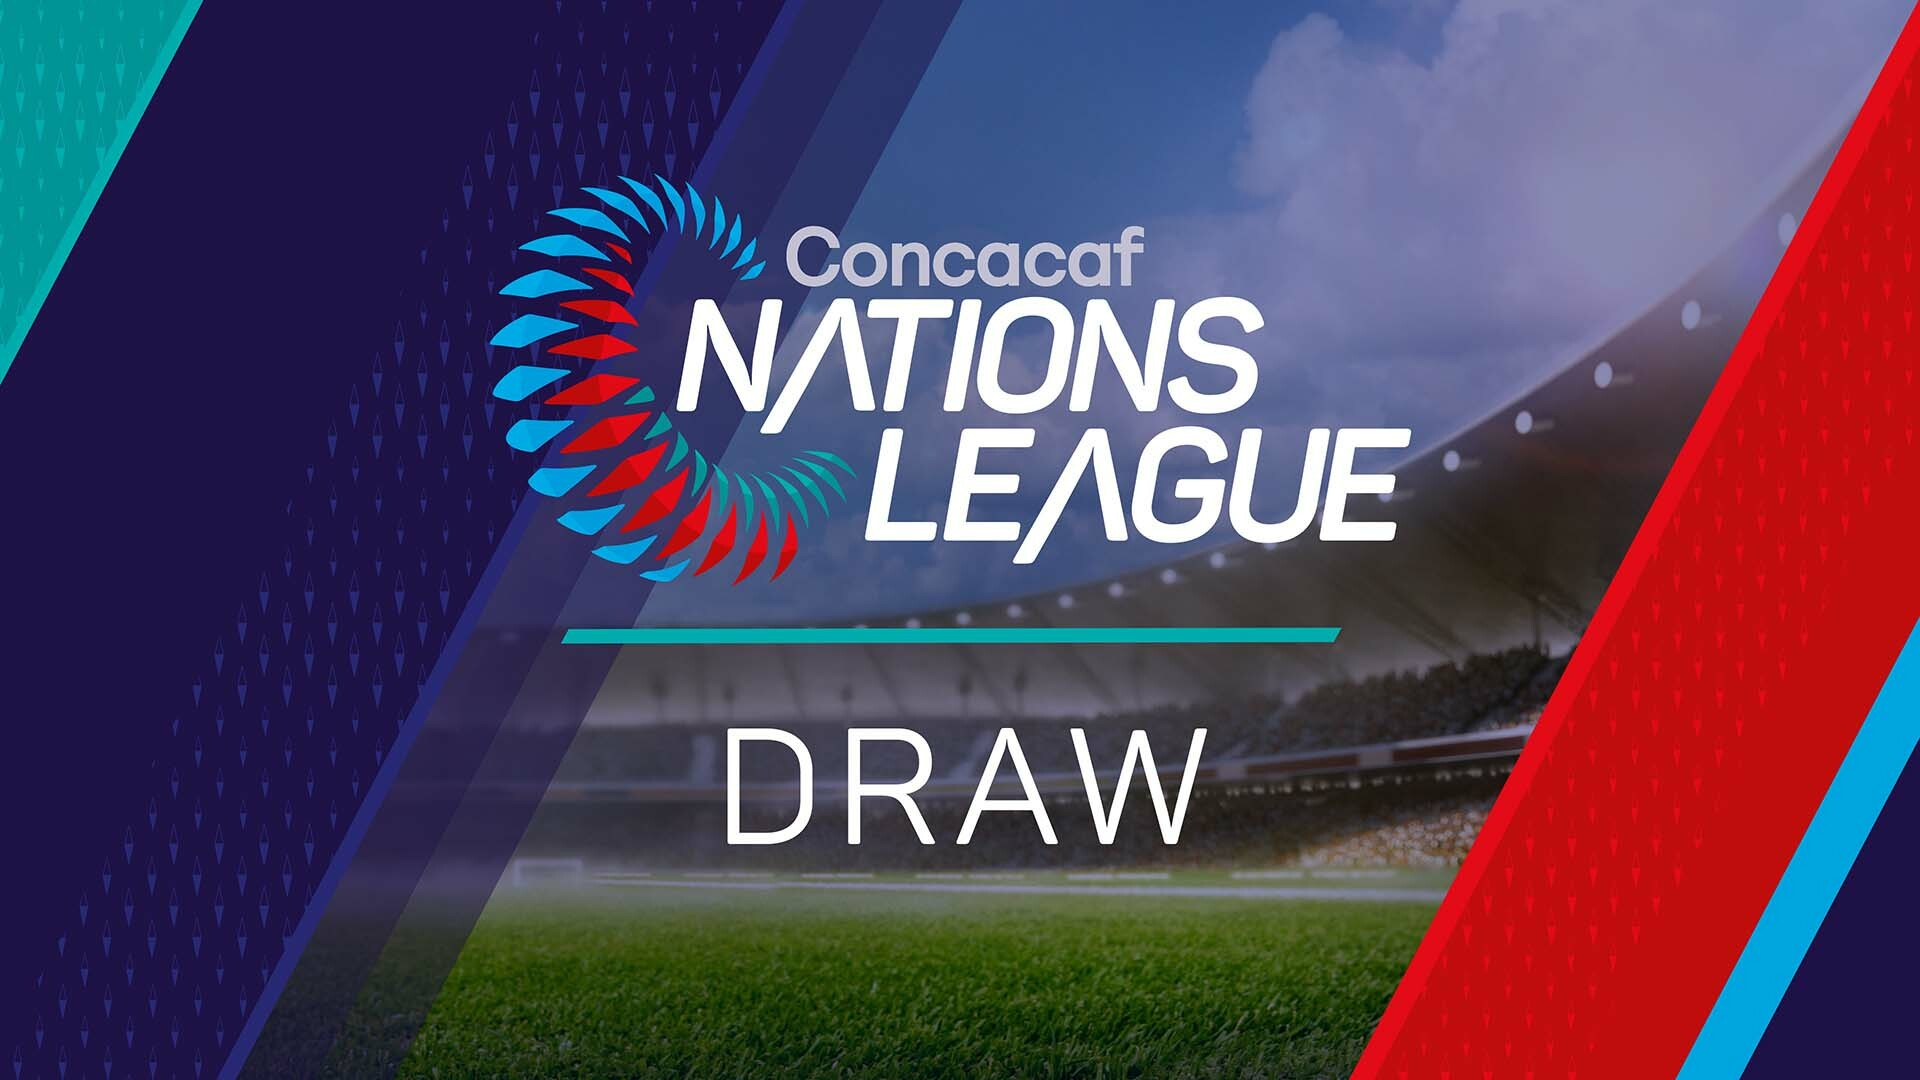 Watch Concacaf Nations League Season 2022 Concacaf Nations League 2022 Draw Show